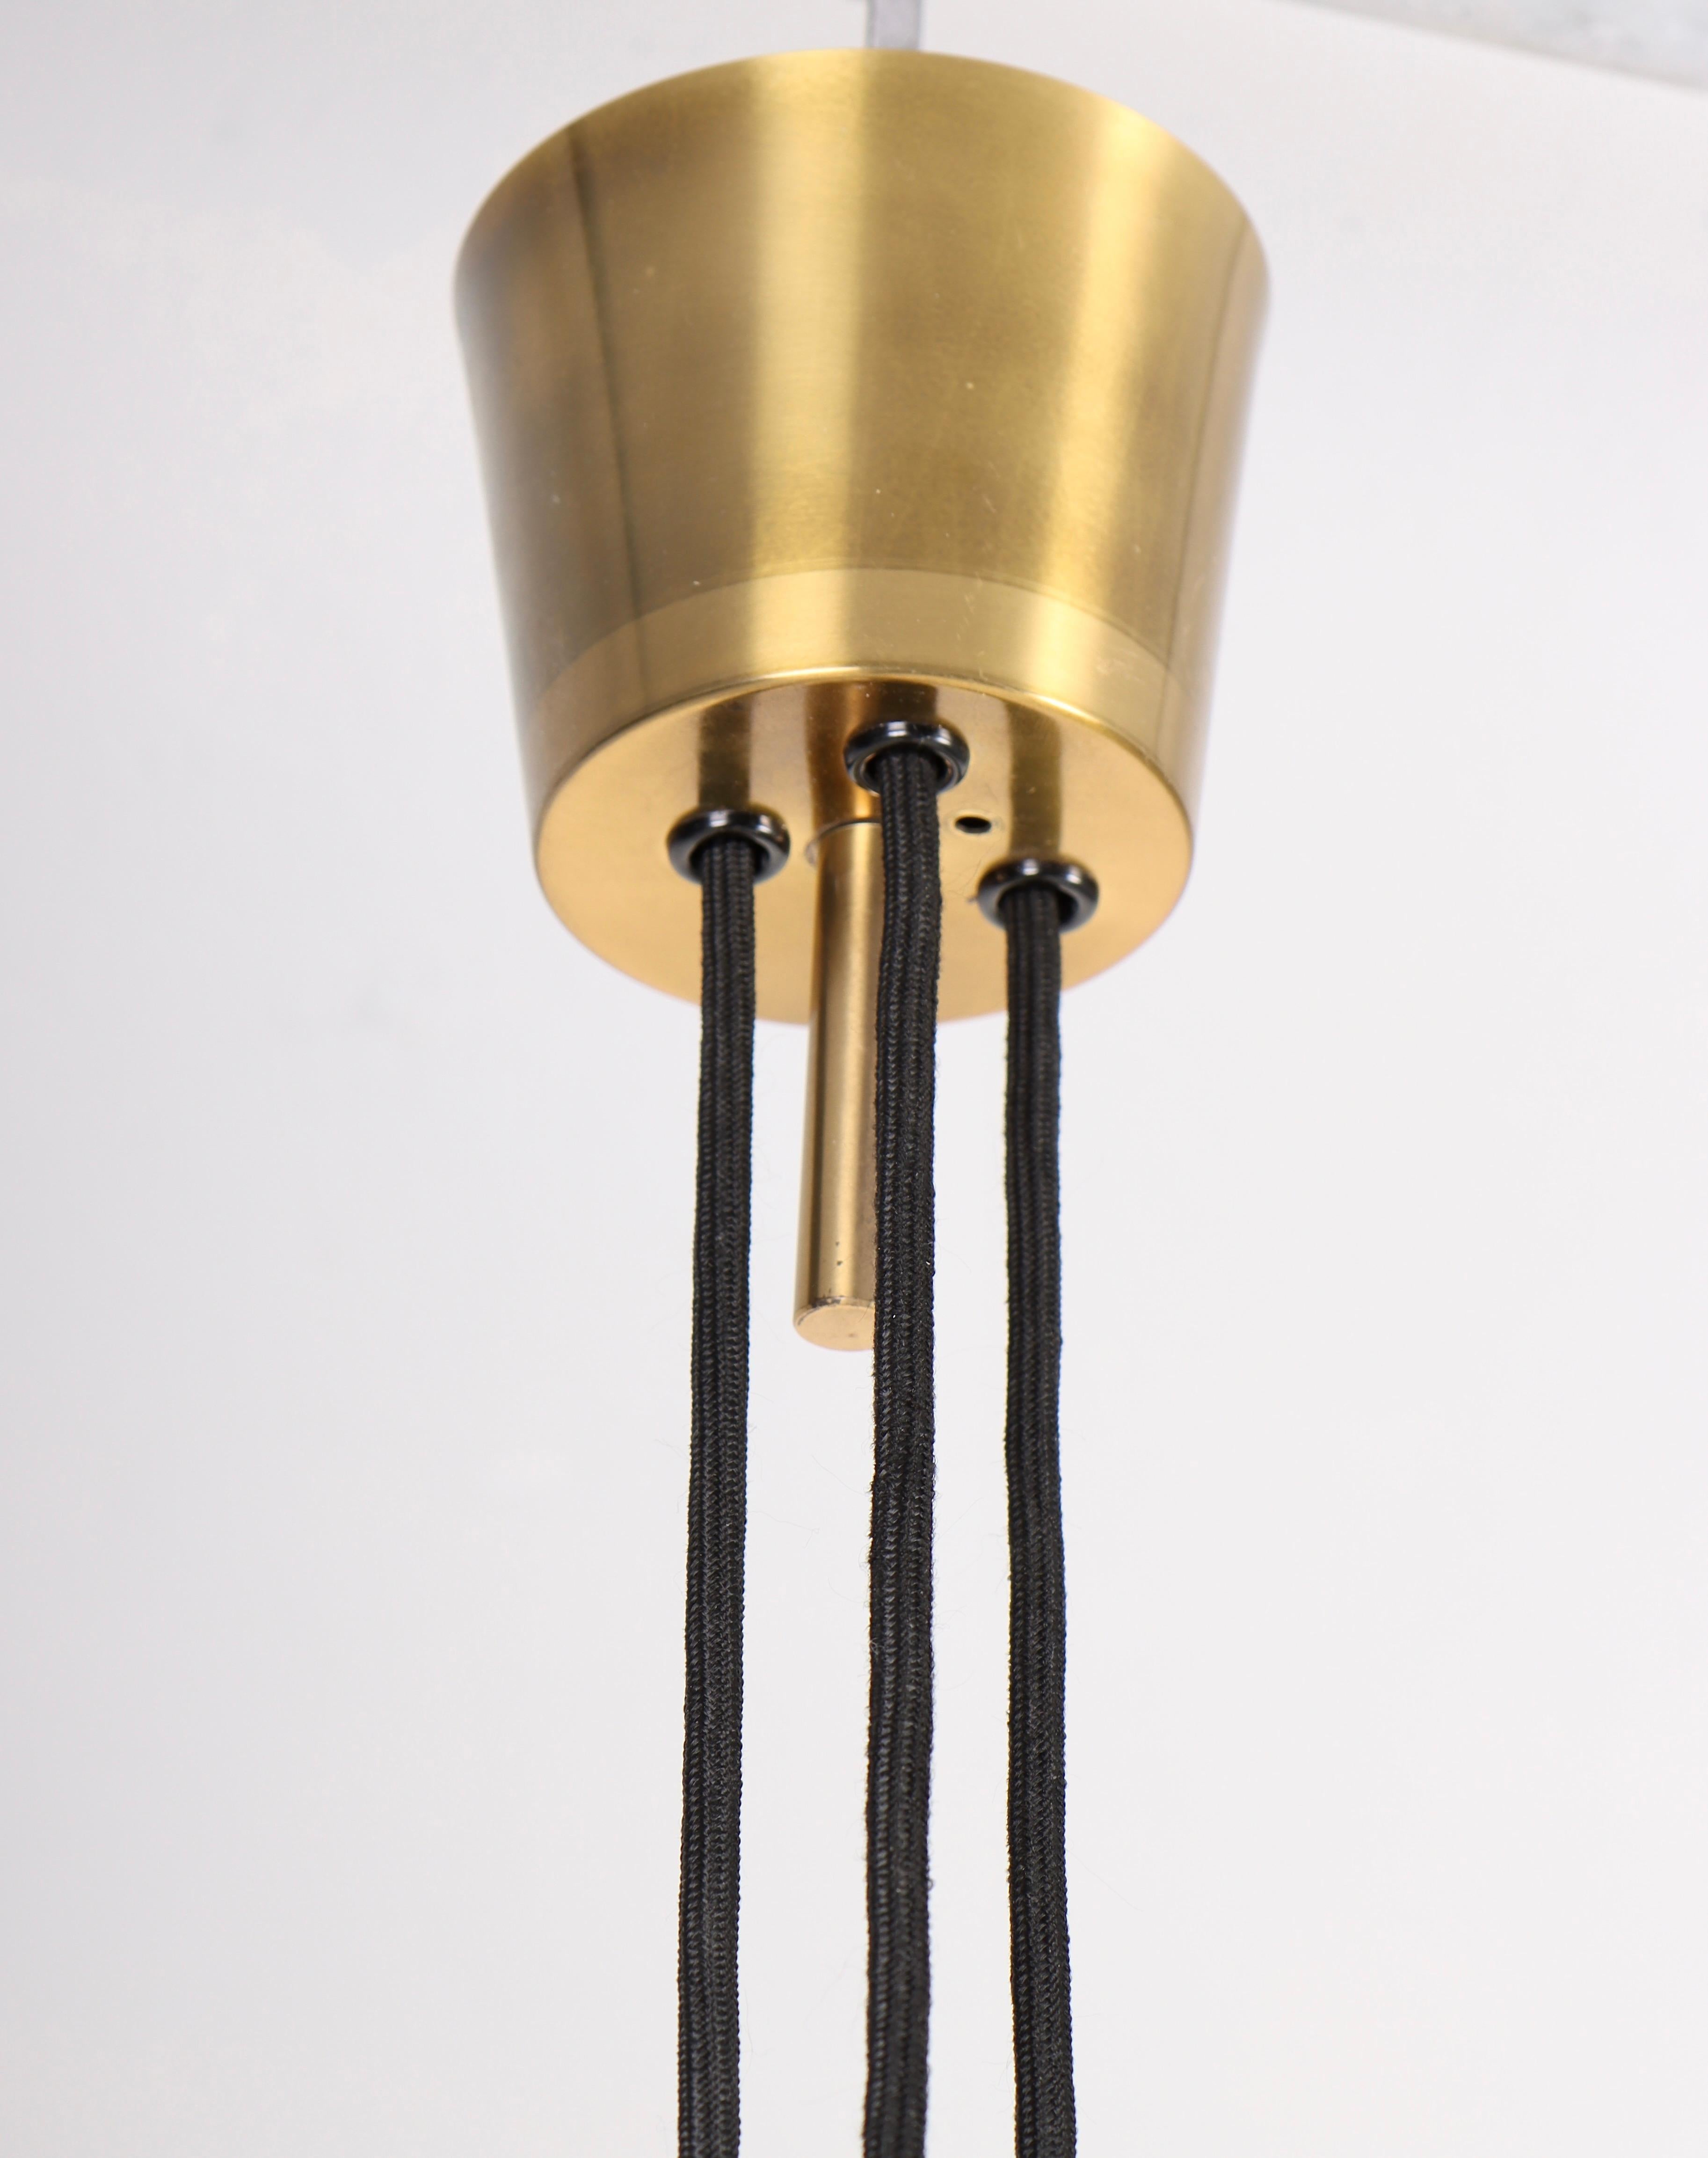 Danish Midcentury Ceiling Lamp in Brass by T.H. Valentiner, 1960s For Sale